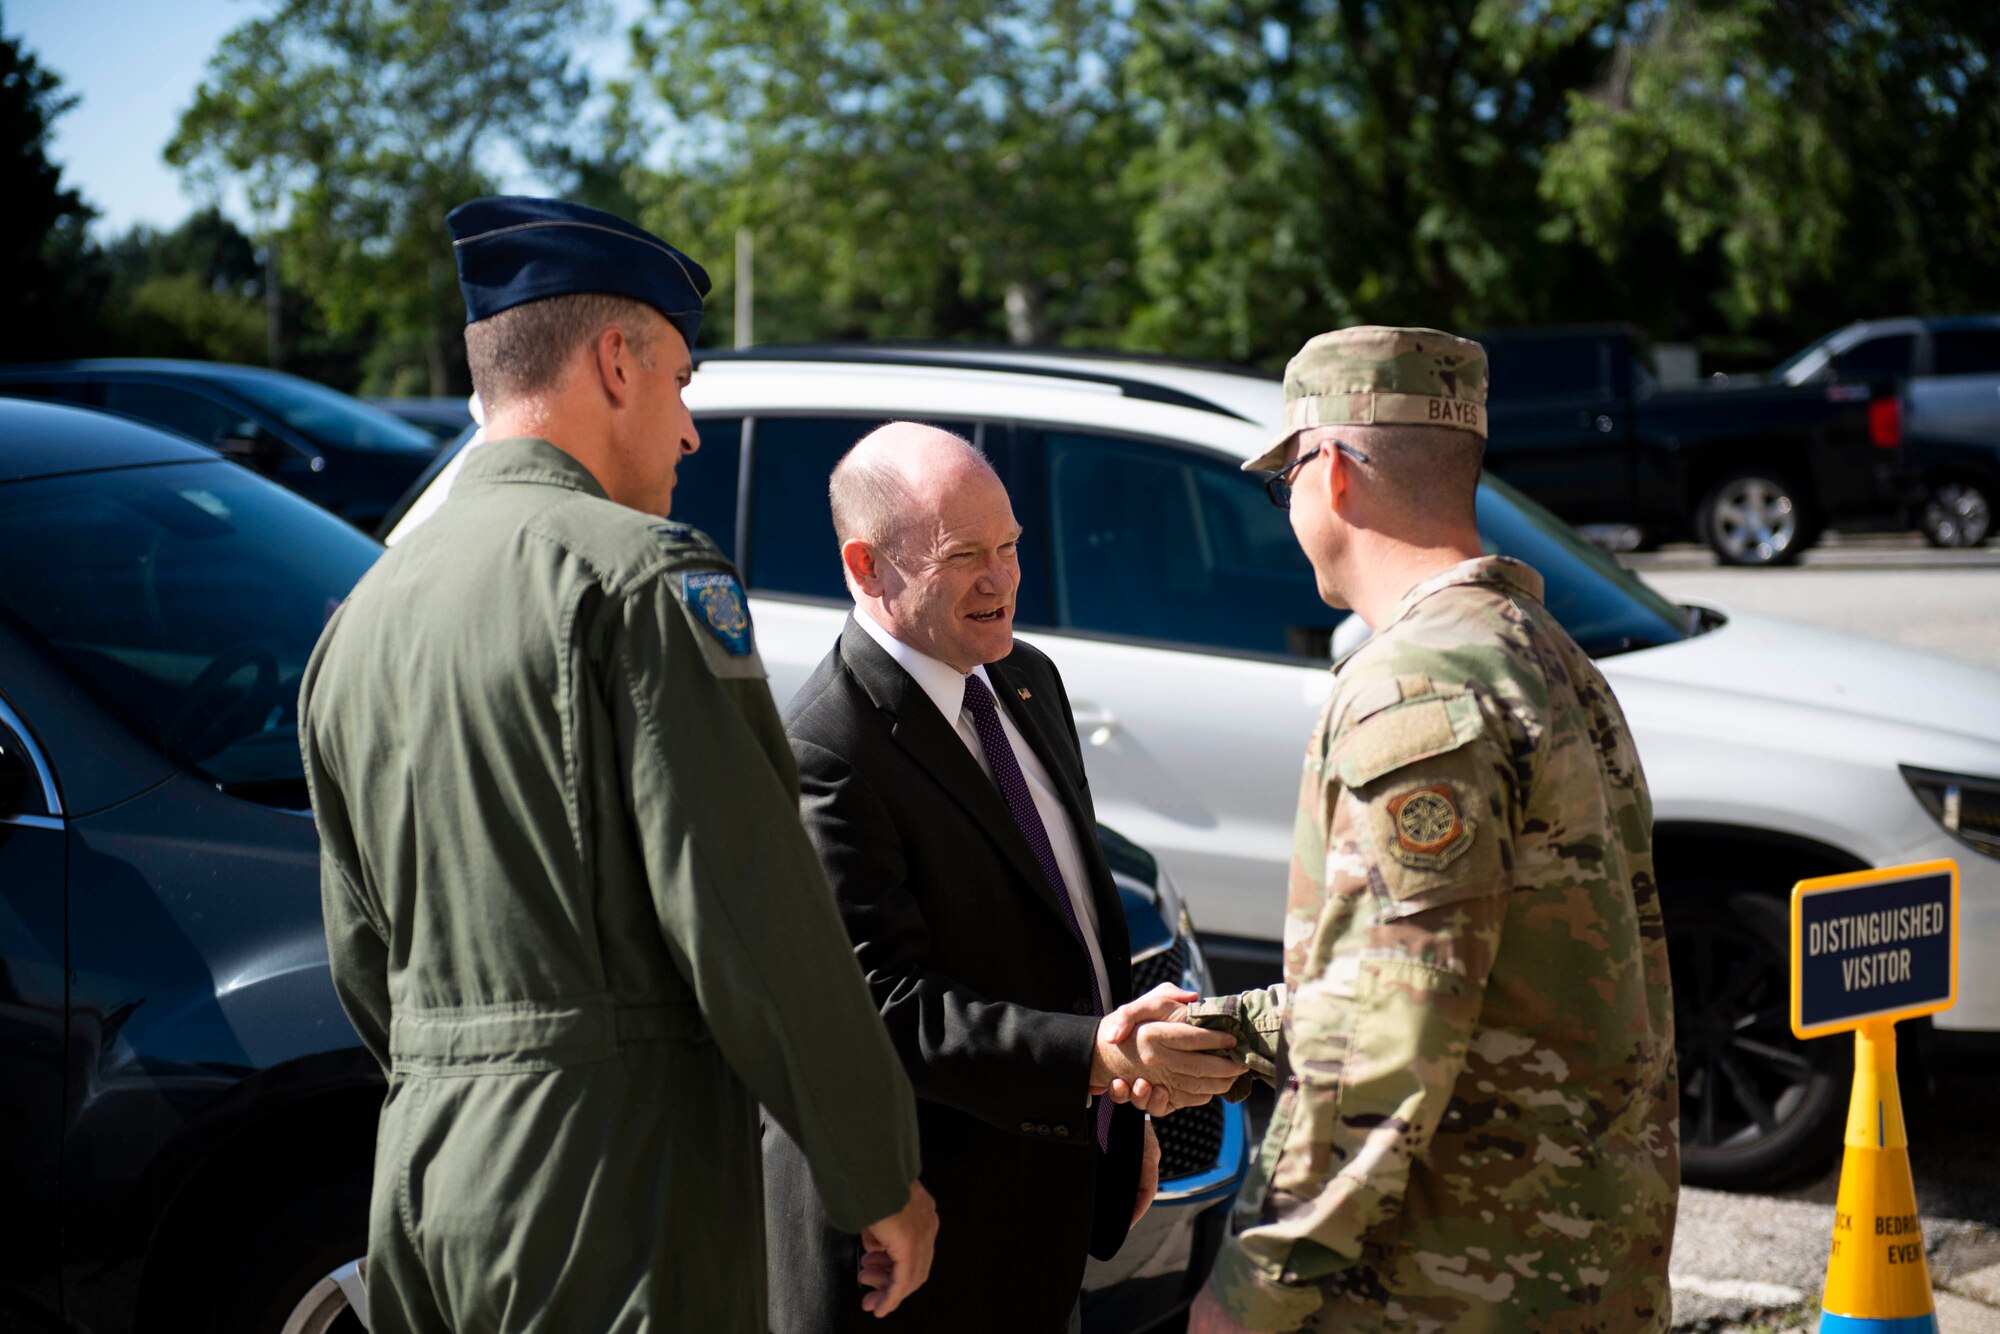 Col. Matt Husemann, left, 436th Airlift Wing commander, and Chief Master Sgt. Timothy Bayes, right, 436th AW command chief, greet U.S. Sen. Chris Coons, center, at Dover Air Force Base, Delaware, June 10, 2022. Coons visited Dover AFB’s SPARK hub, BEDROCK. BEDROCK is Dover’s foundation for innovation, designed to leverage technology and off-the-shelf solutions to fix the military’s problems and bridge the gap between Dover's Airmen and industry experts.(U.S. Air Force photo by Tech. Sgt. J.D. Strong II)